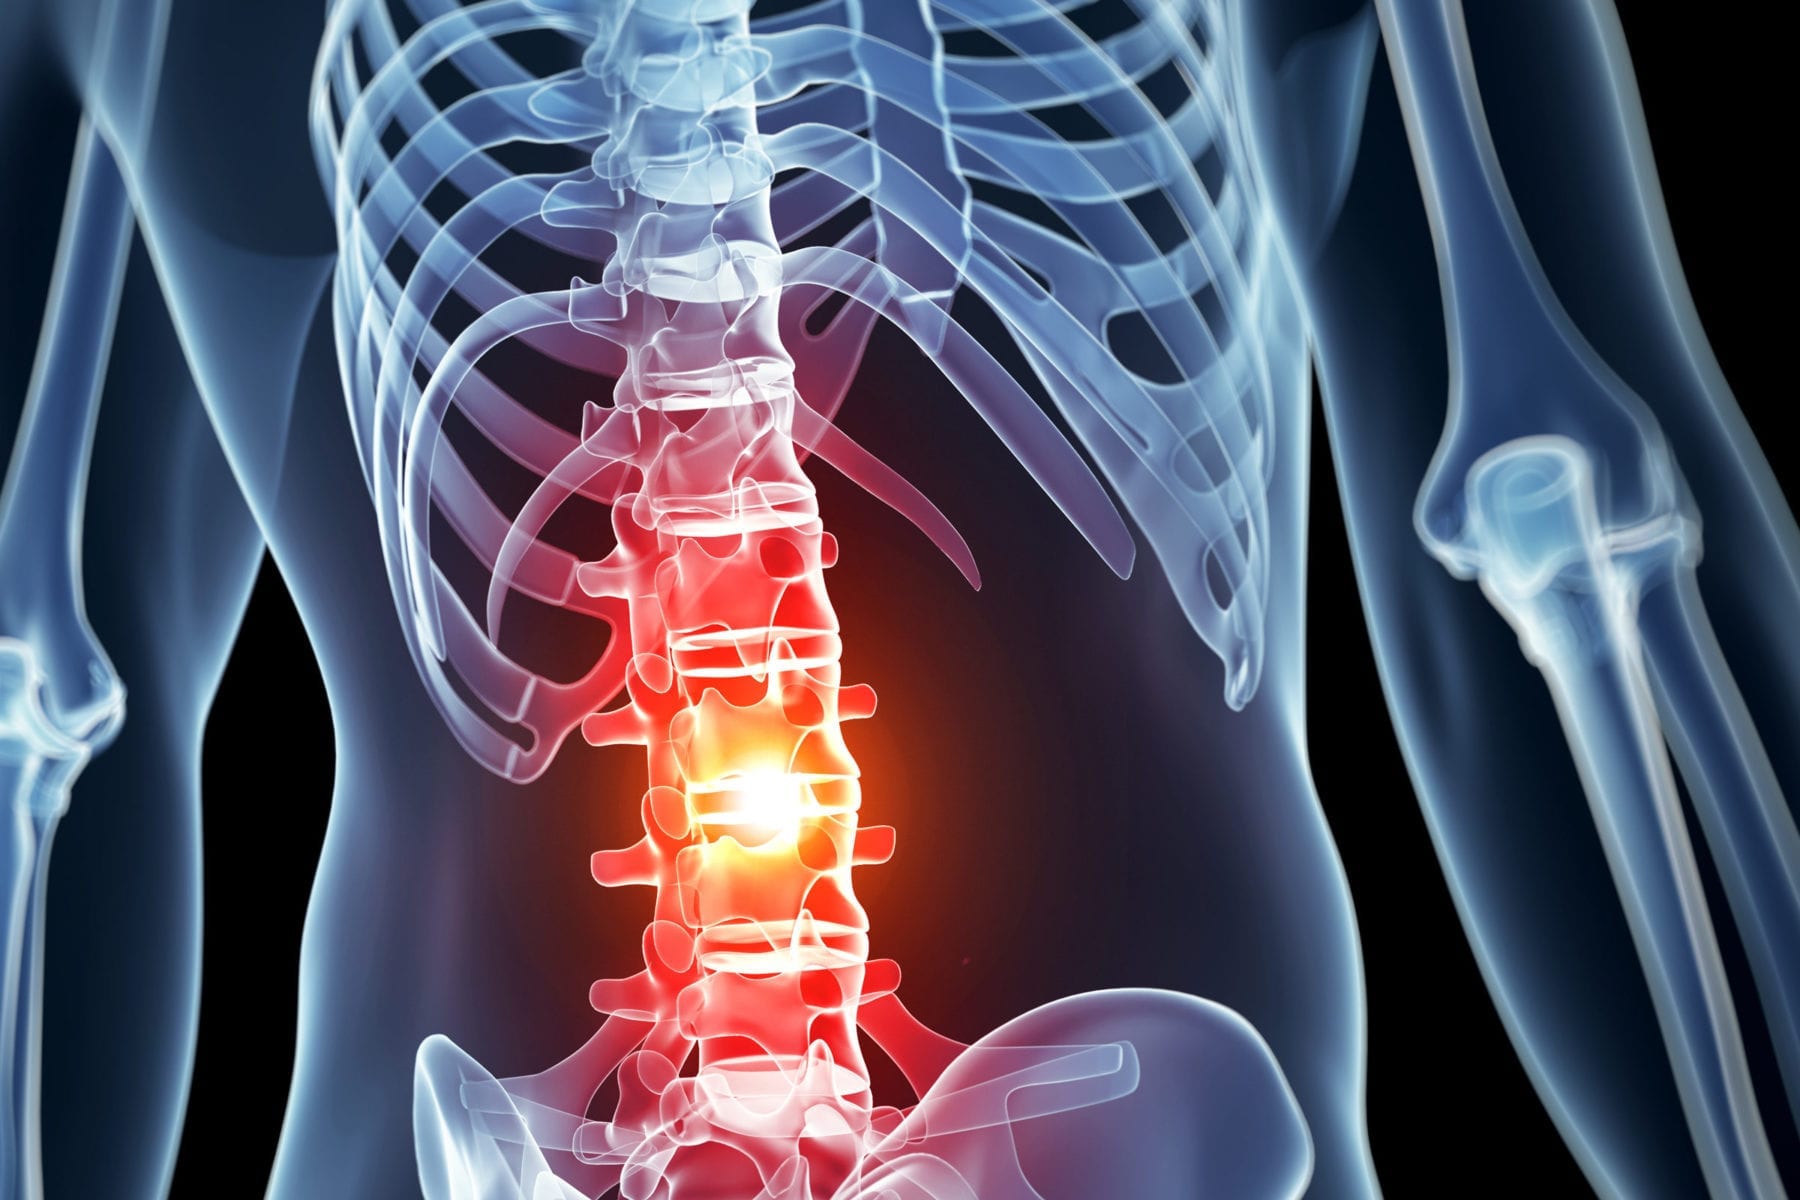 The potential to prevent some spinal cord injuries from resulting in paralysis